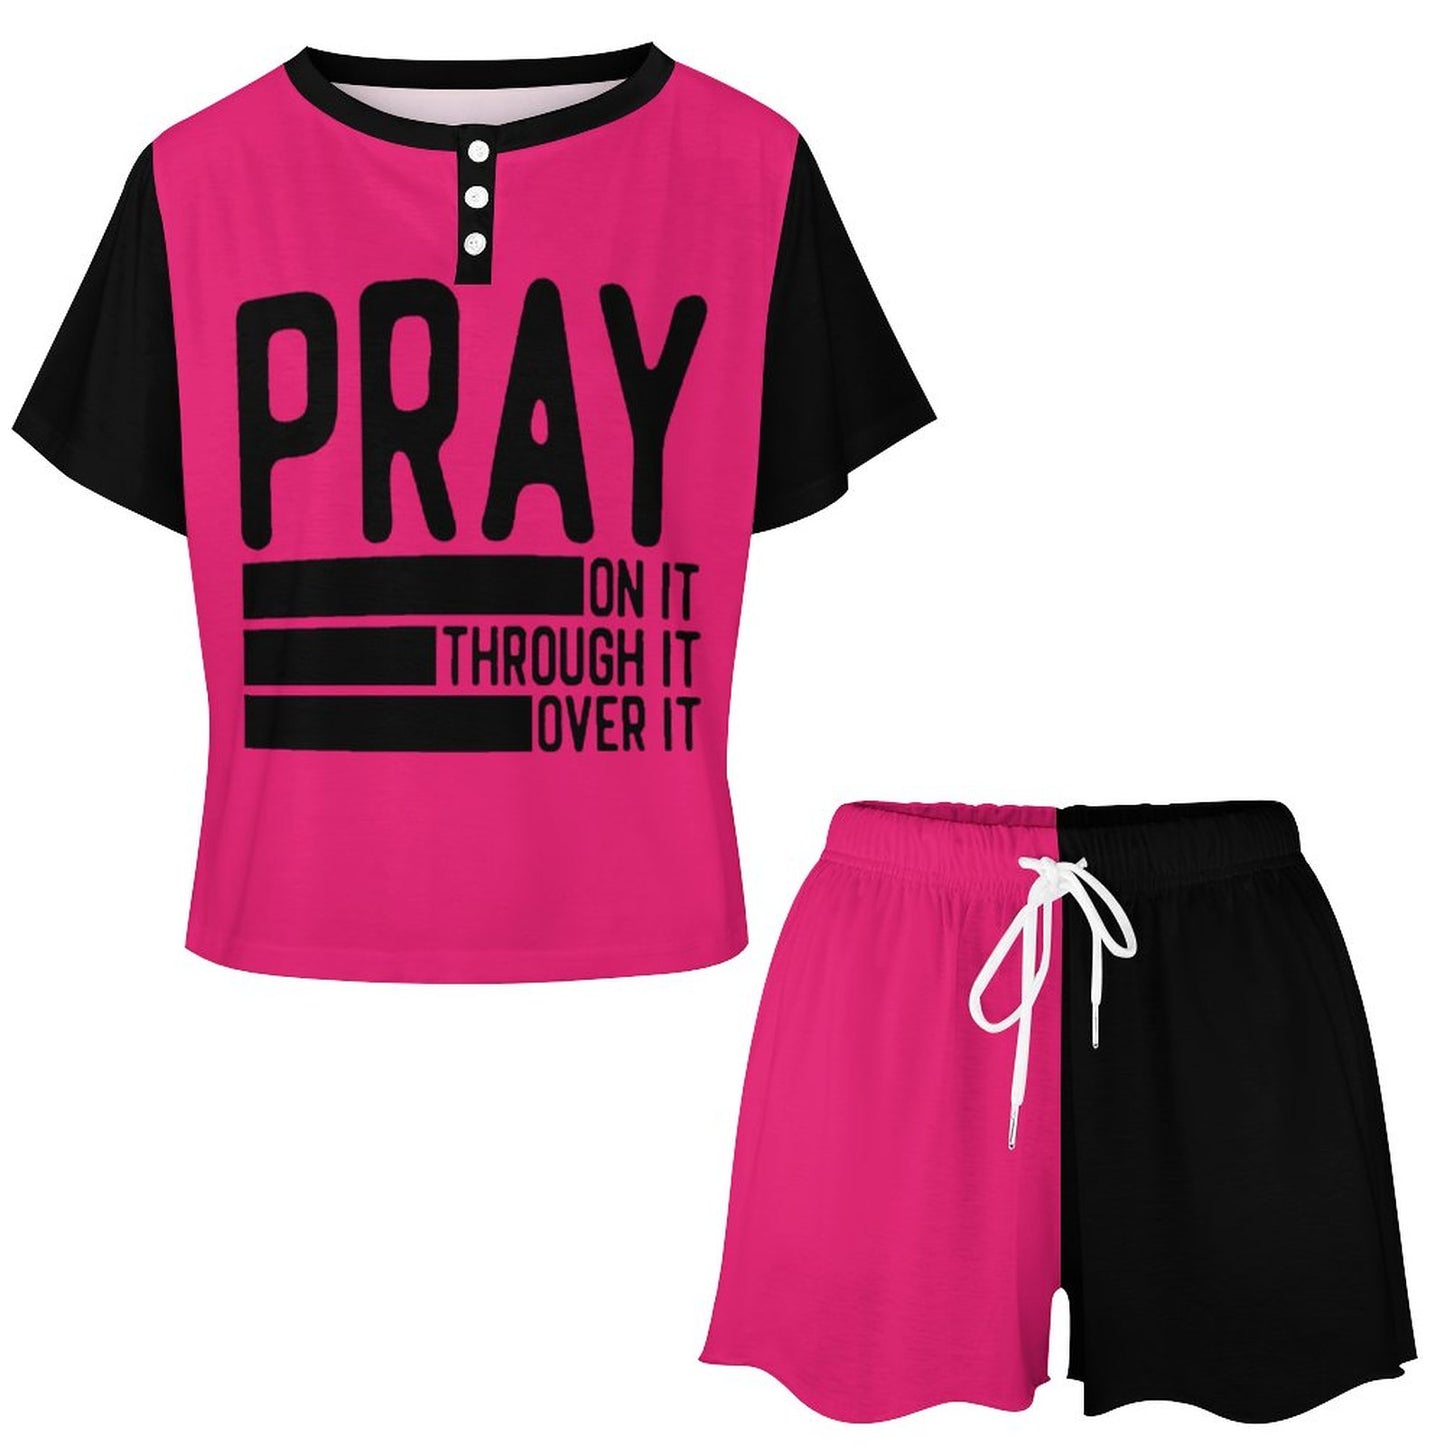 Pray On It Through It Over It Because Adulting Is Hard Without Jesus Women's Christian Pajamas